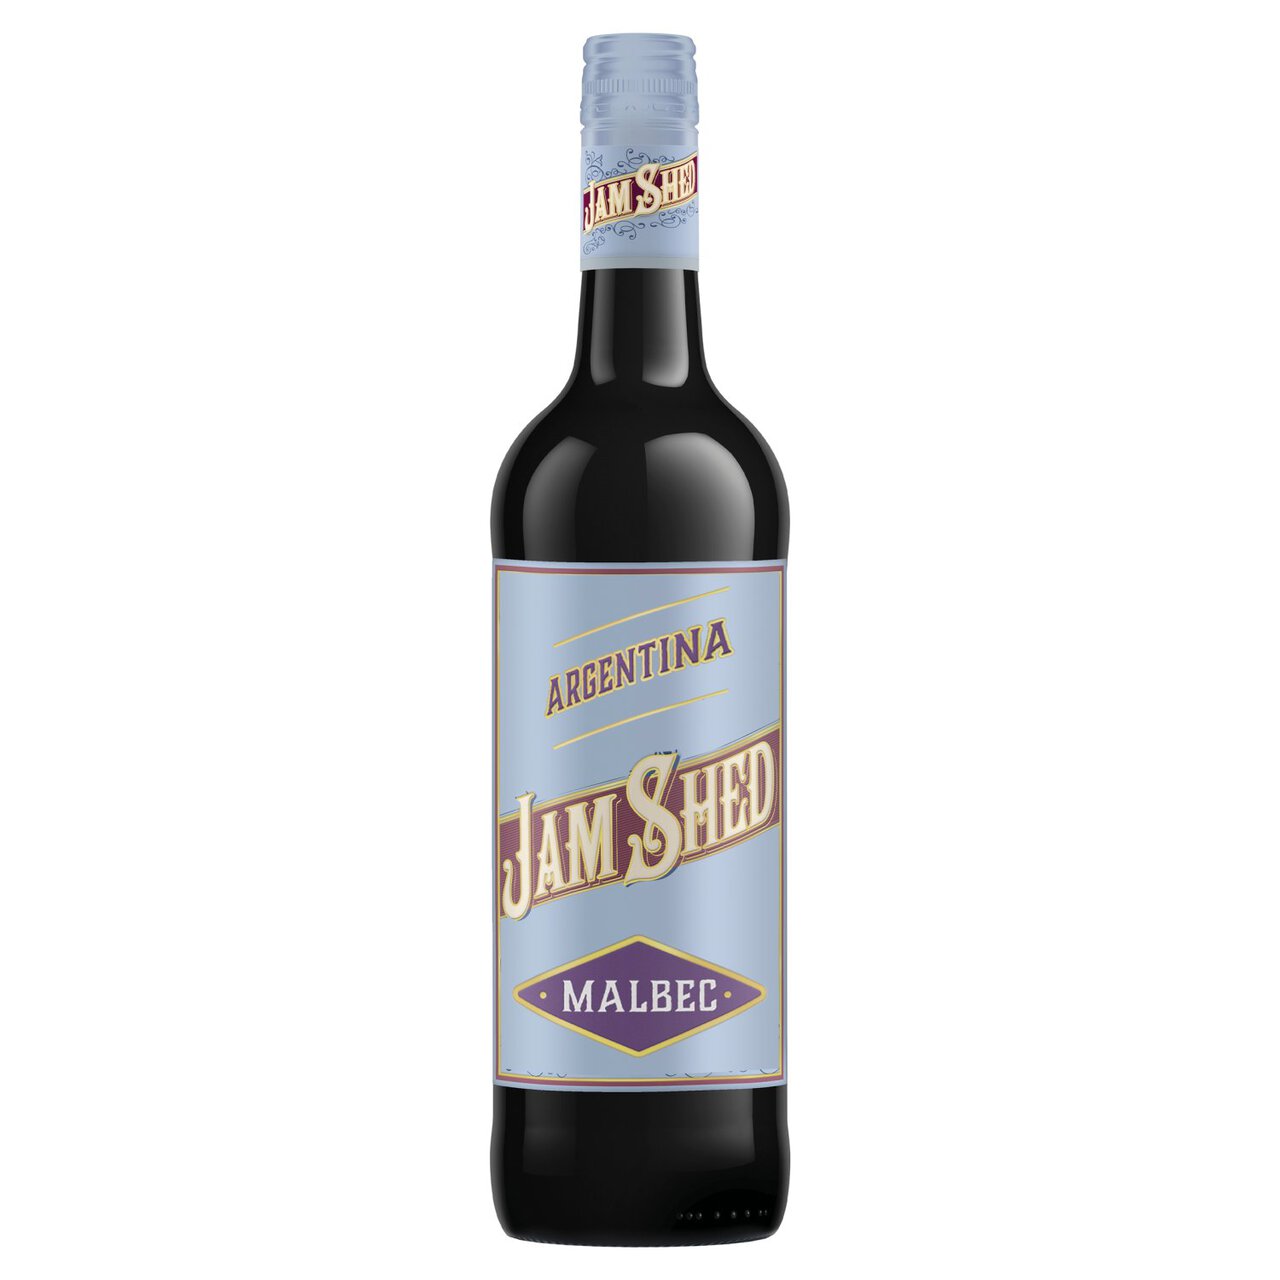 Jam Shed Argentinian Malbec 75cl